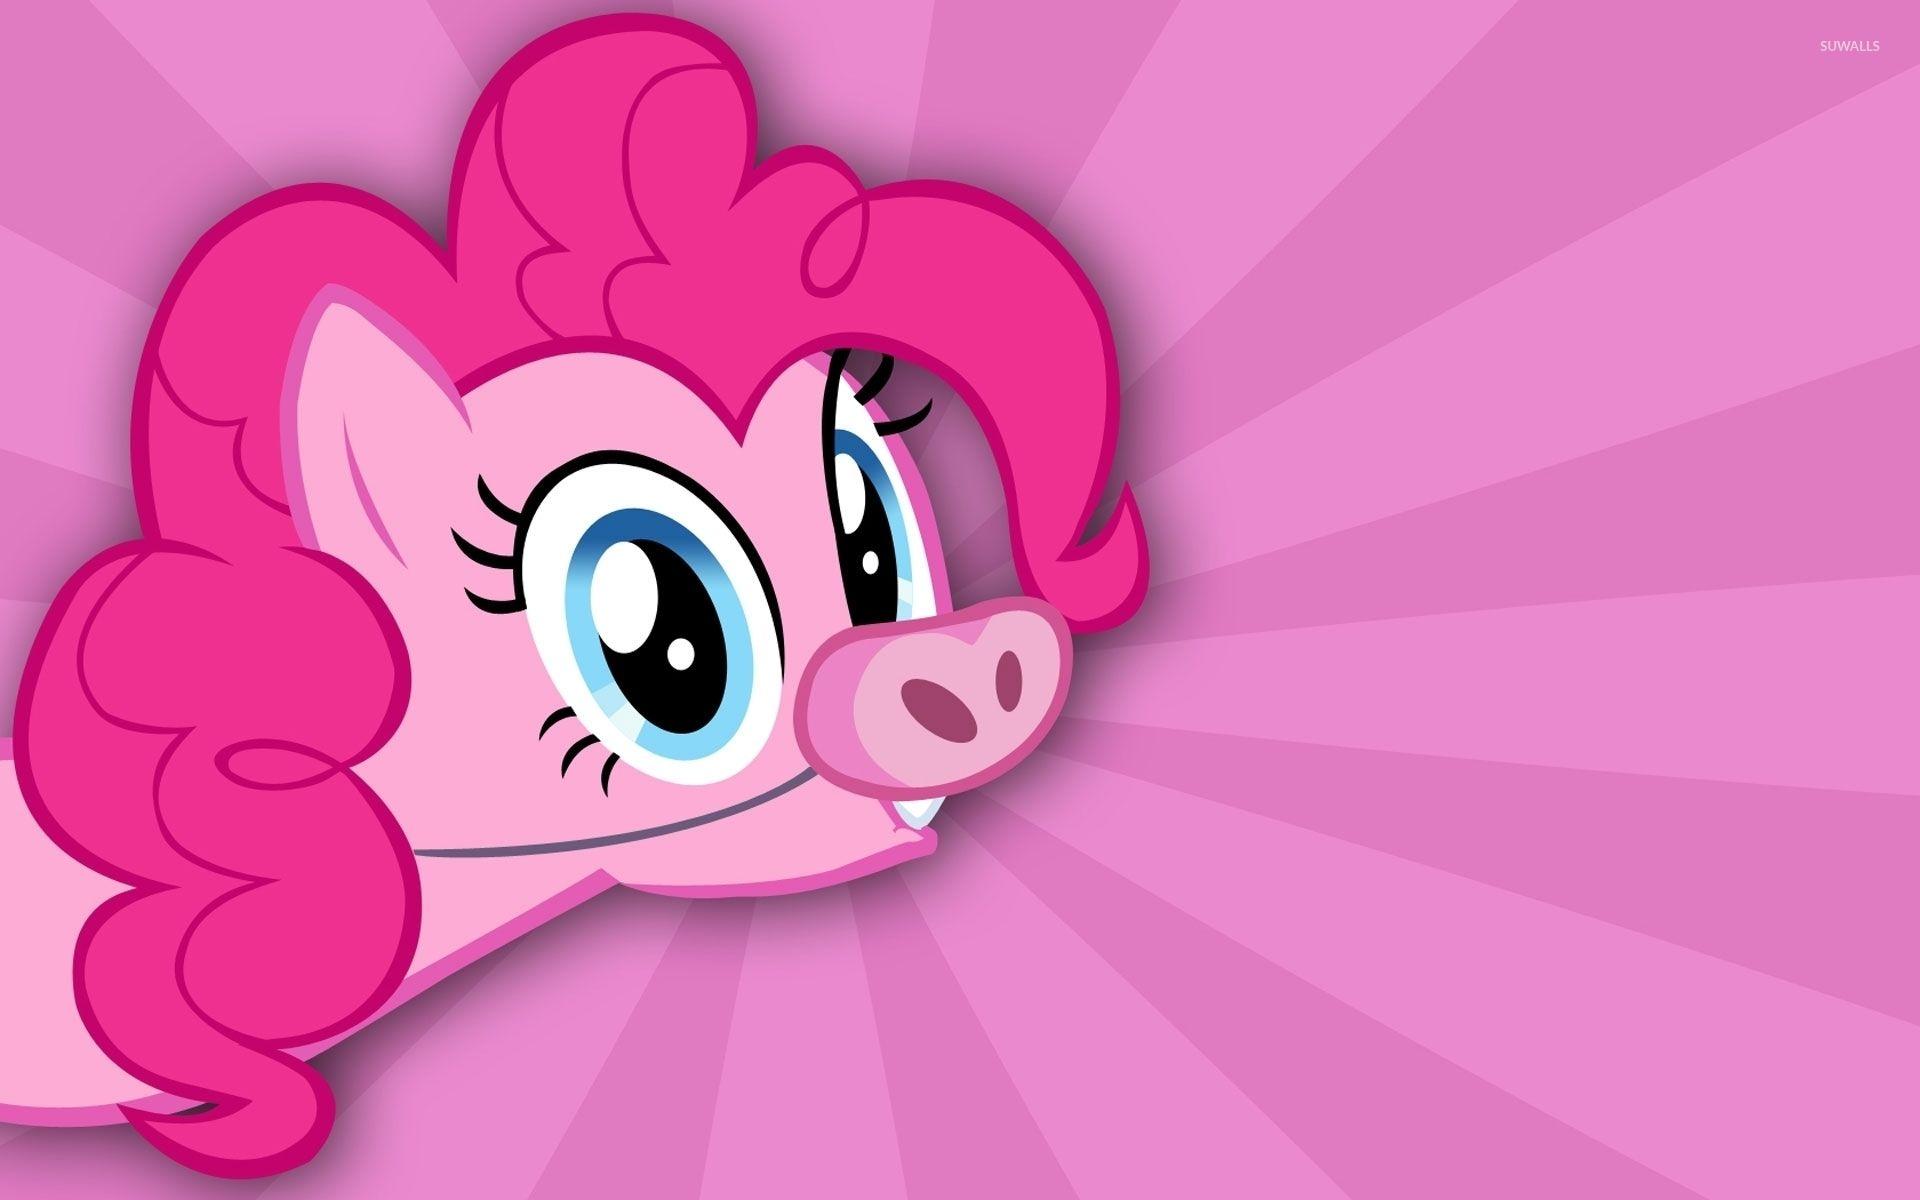 Pinkie Pie with a pig nose mask Little Pony wallpaper